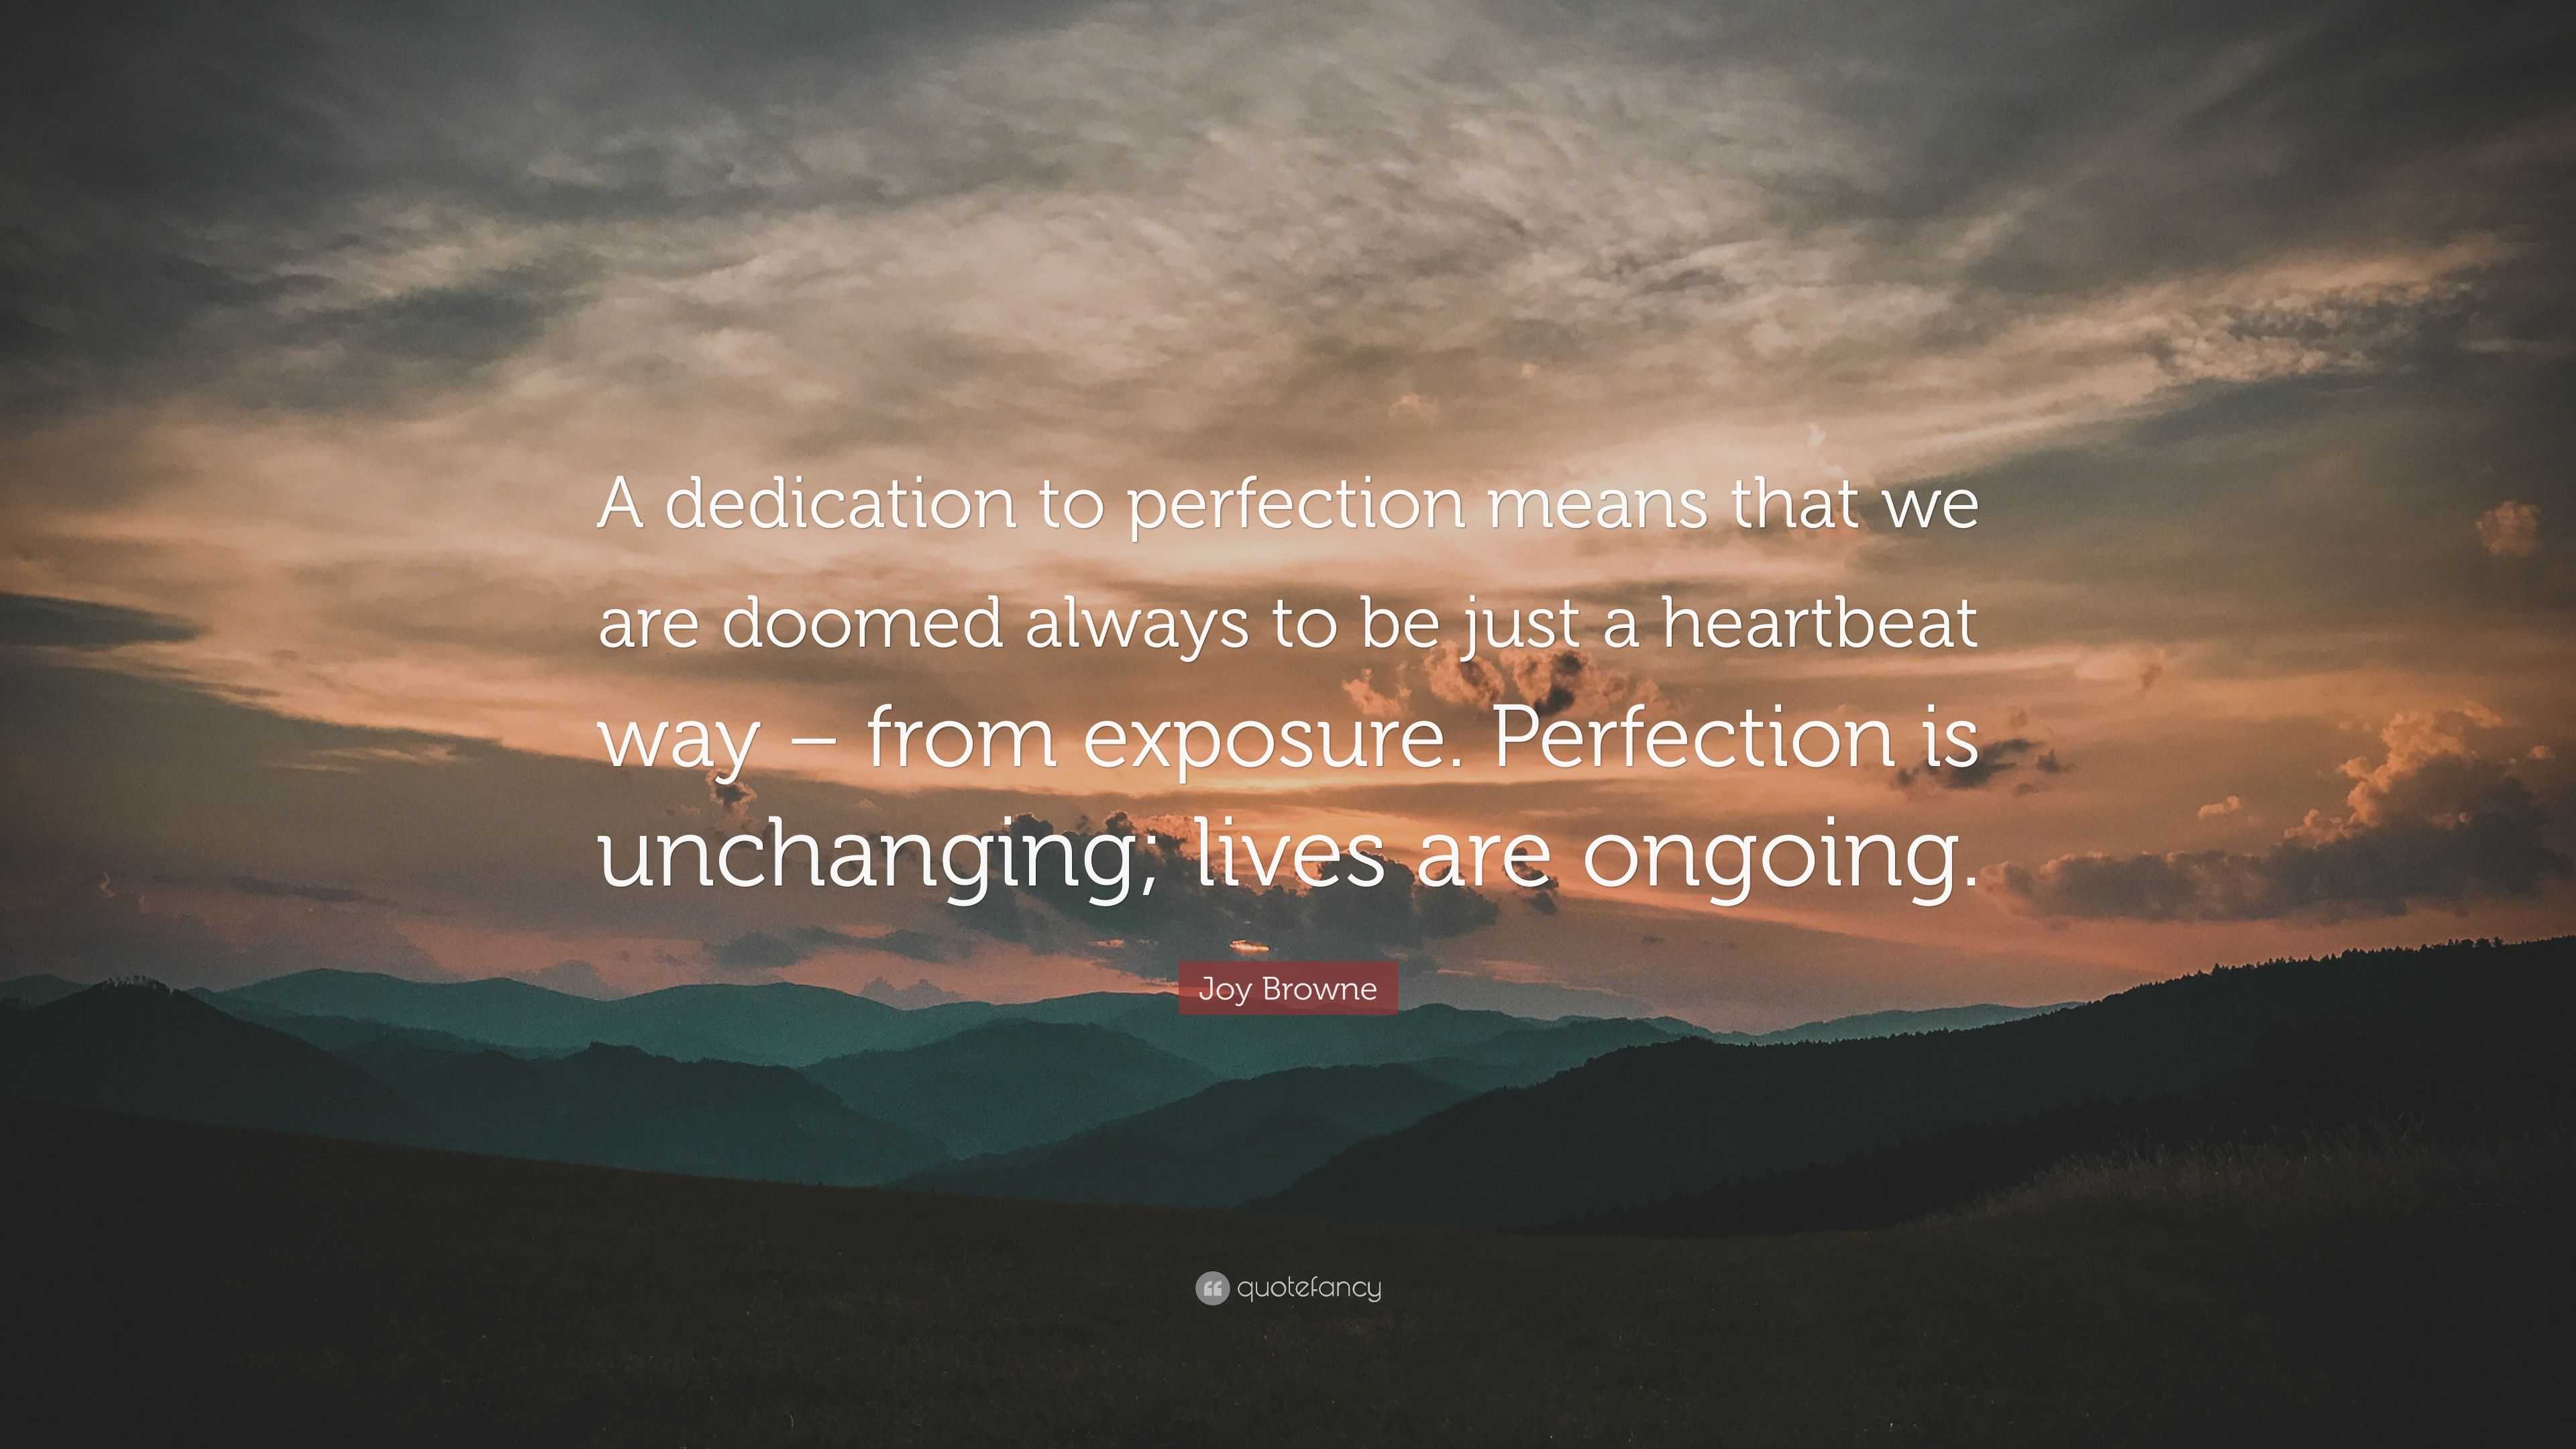 Joy Browne Quote: “A dedication to perfection means that we are doomed  always to be just a heartbeat way – from exposure. Perfection is unc”